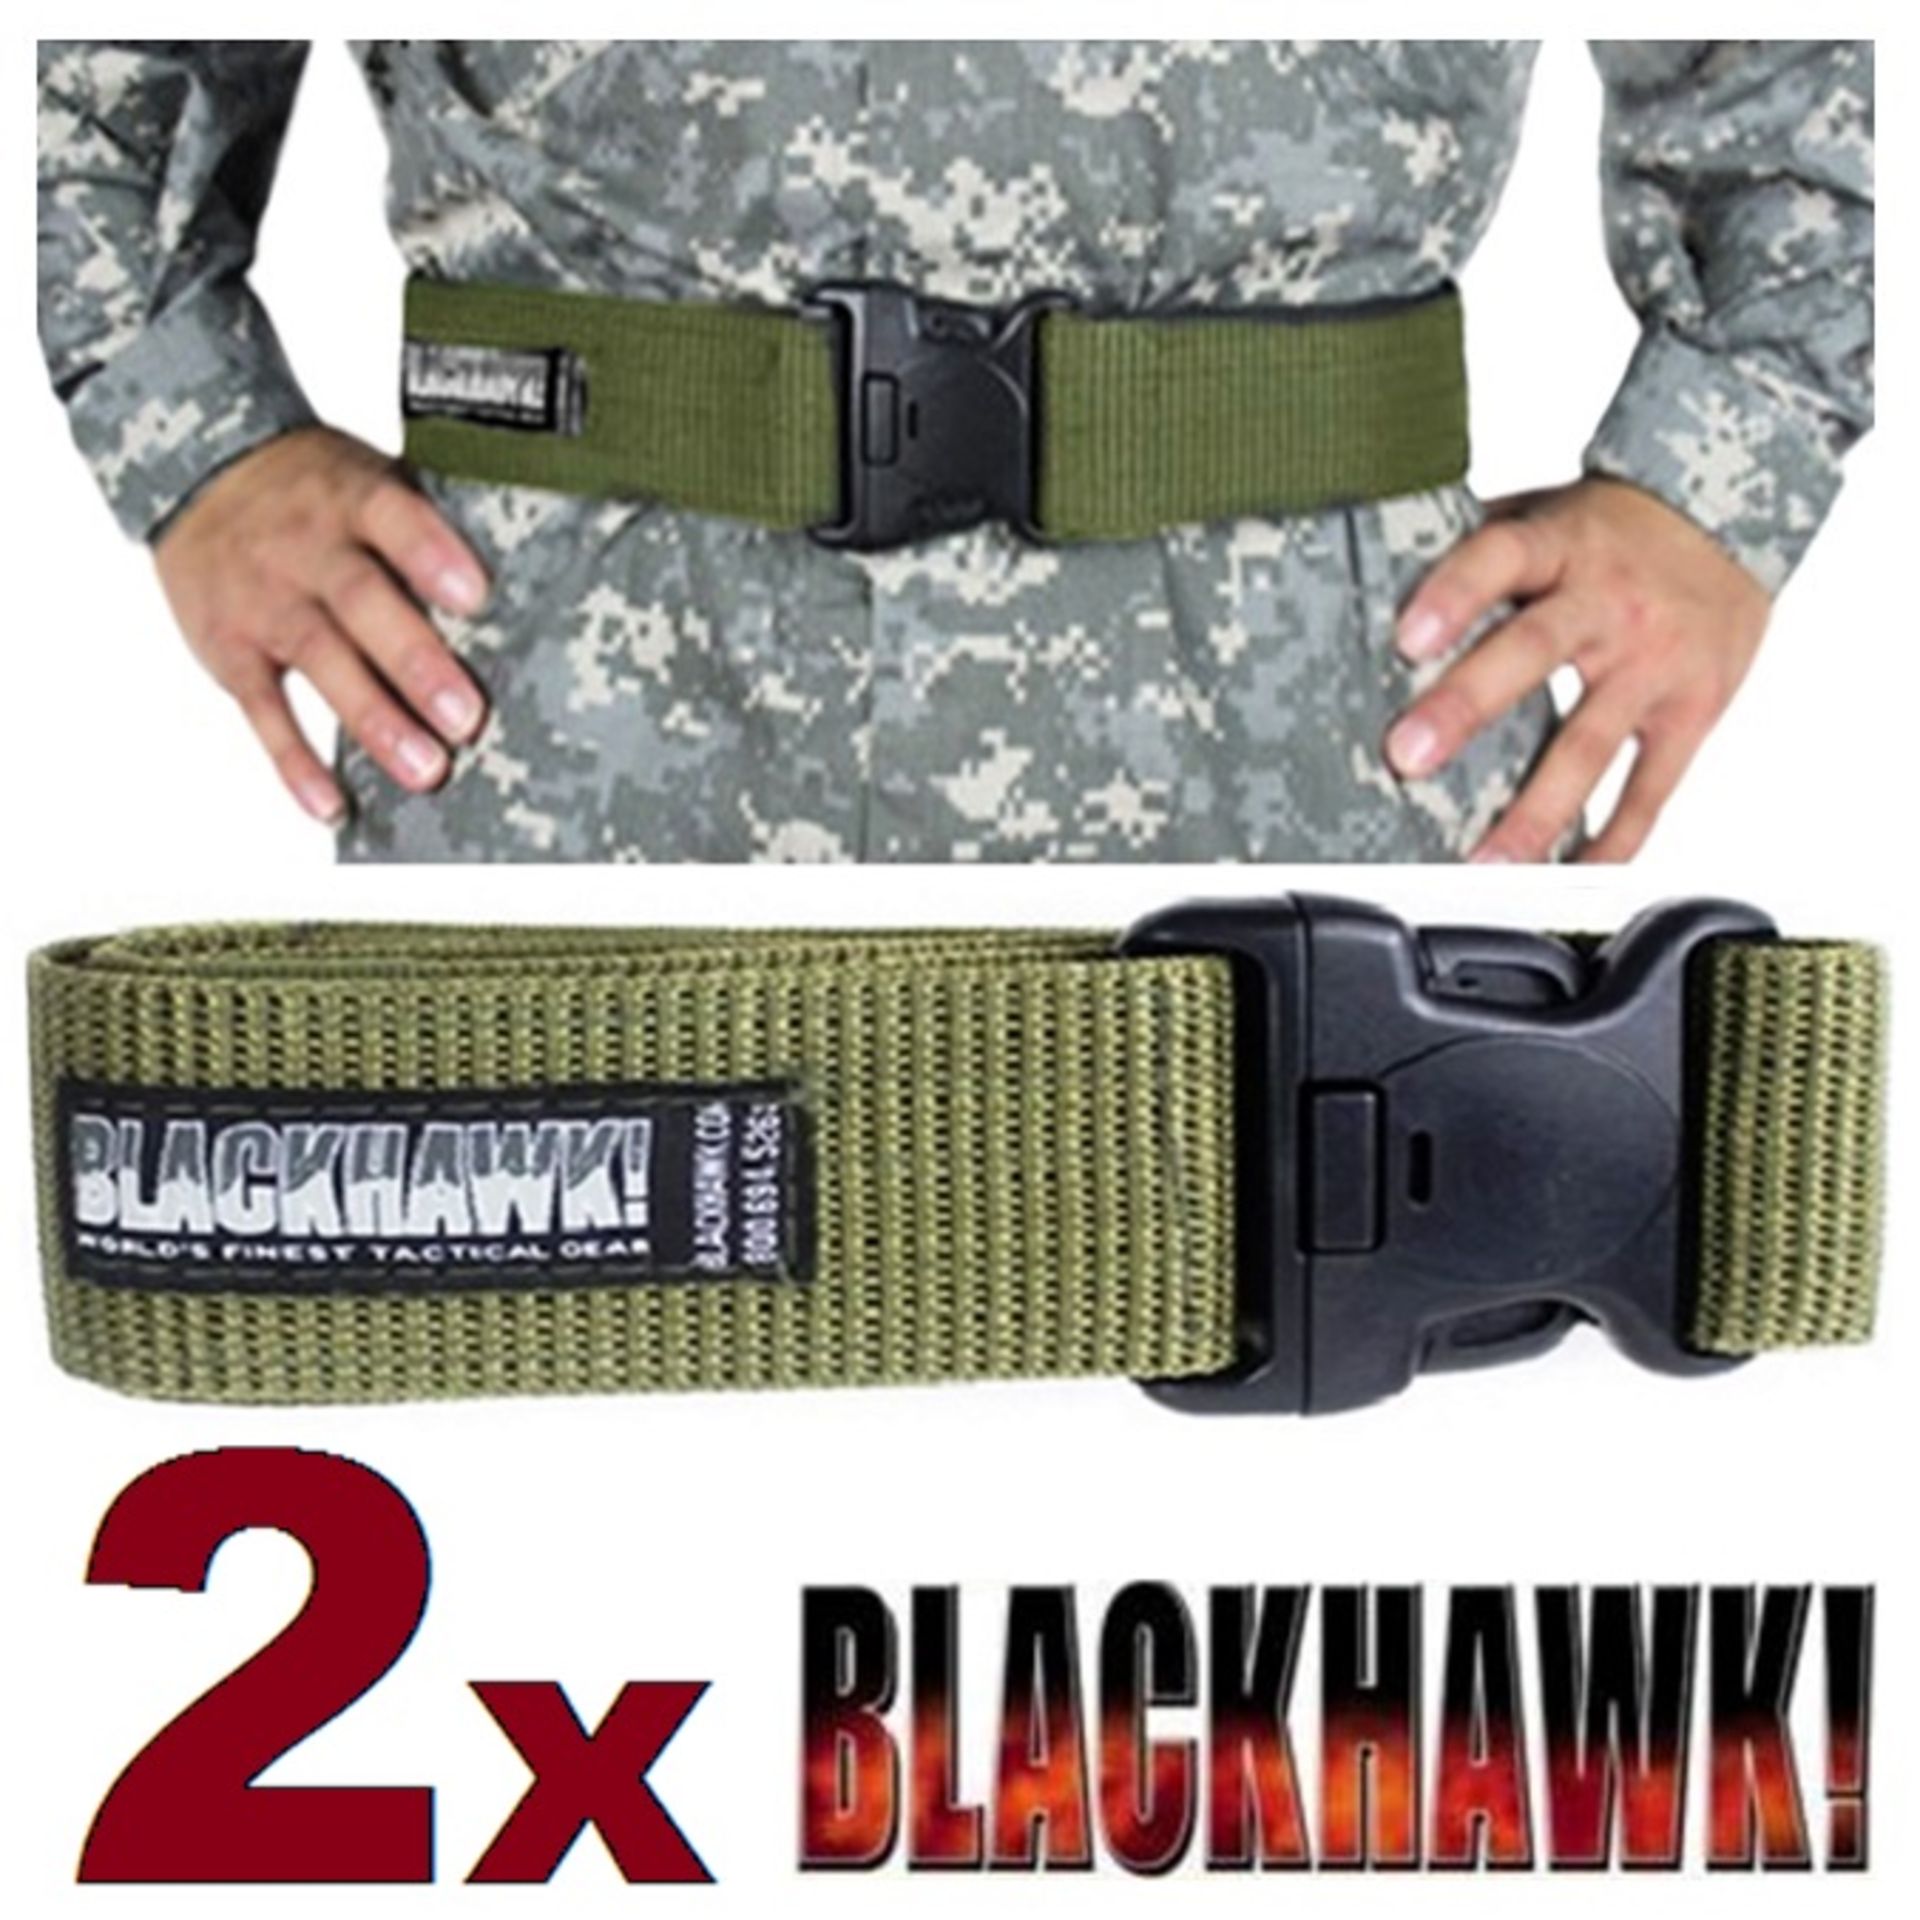 2 x BLACKHAWK - Heavy Duty - Thick Weave Belts with Black Buckle for Outdoor Hunting Army Military